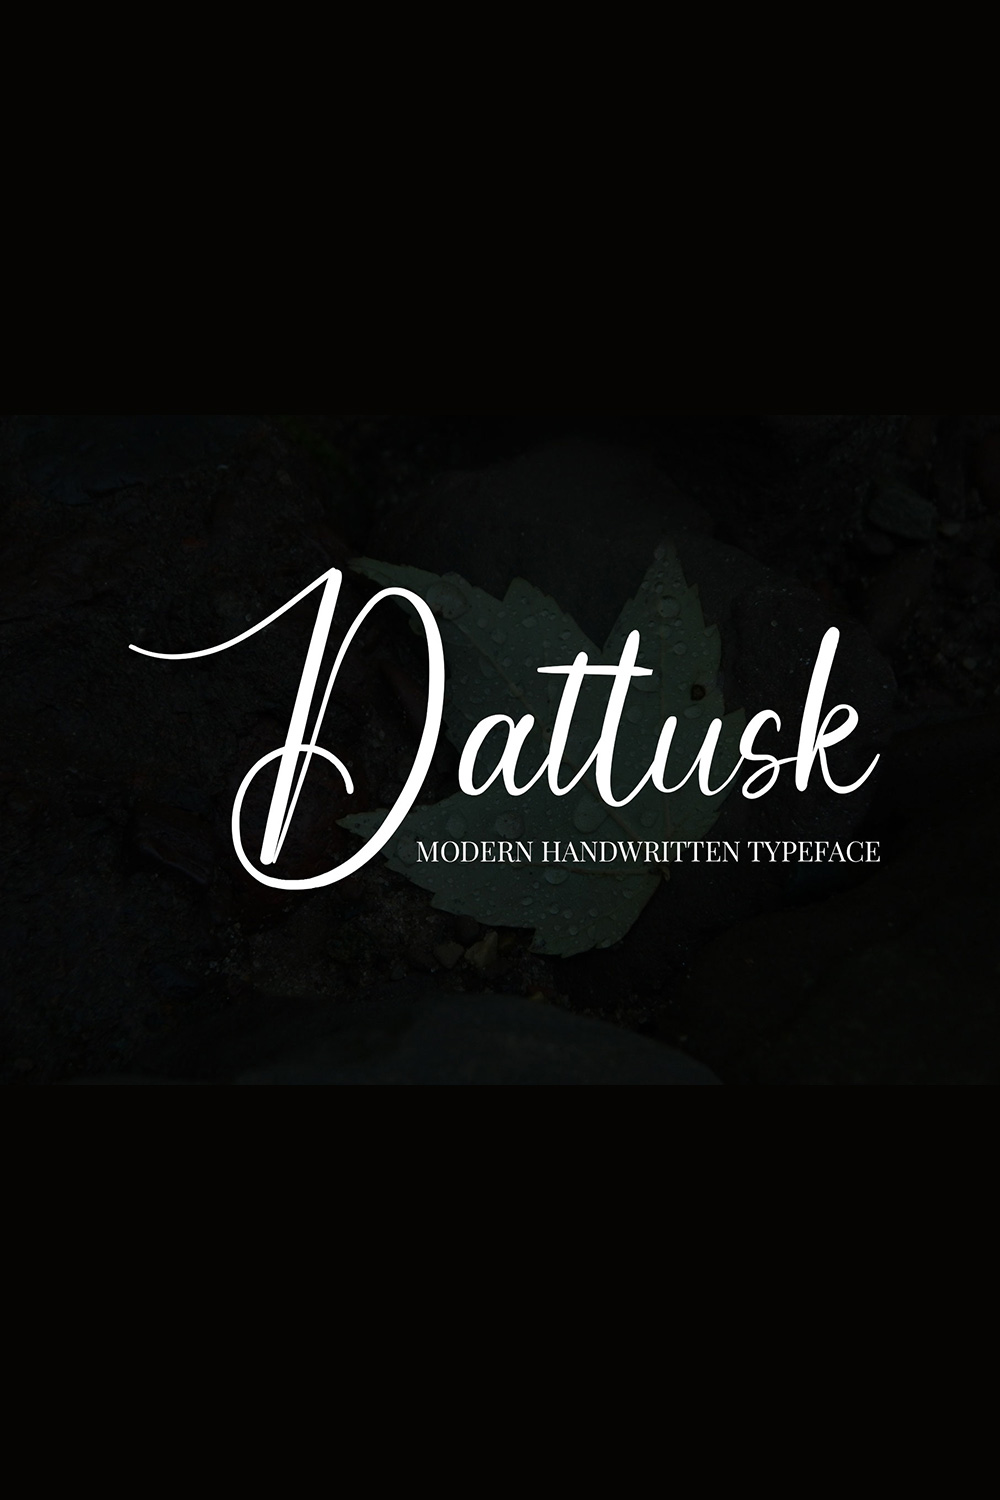 An image with text showing the exquisite Dattusk font